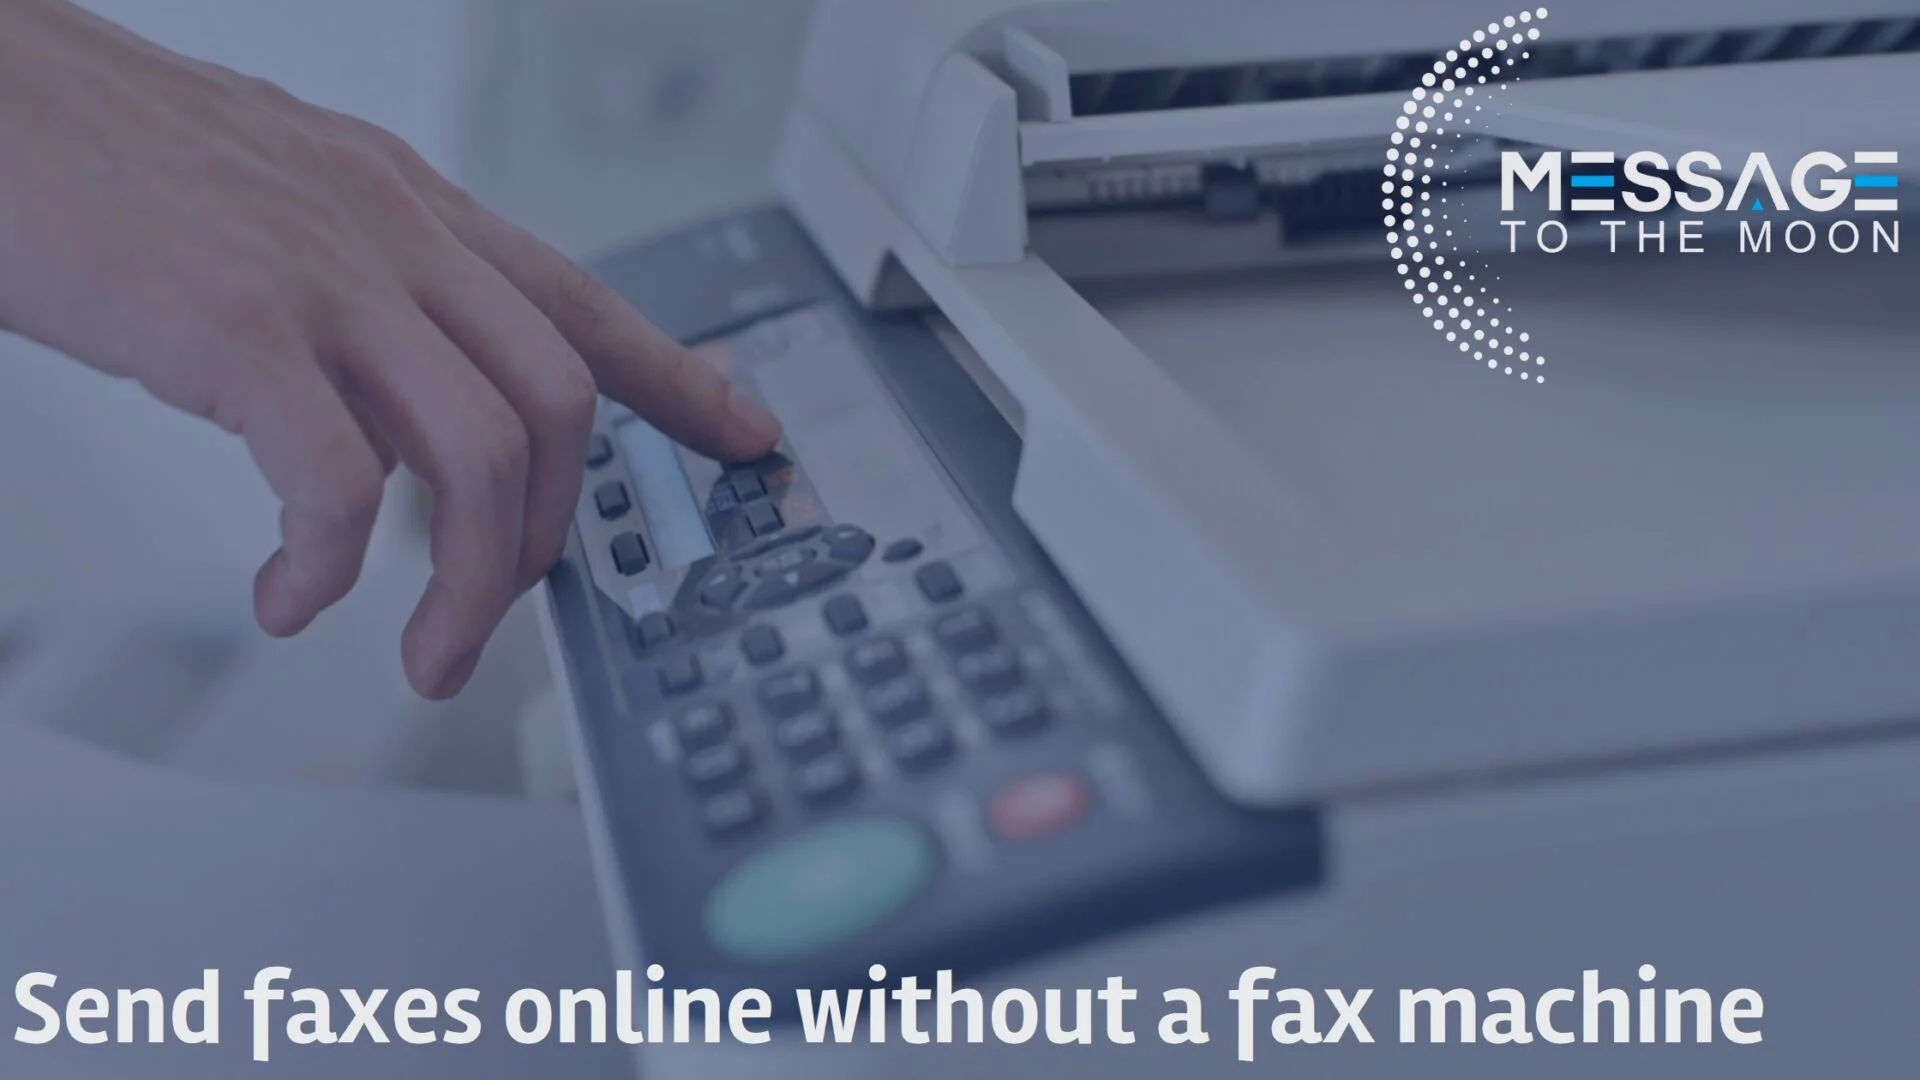 Send faxes online without a fax machine